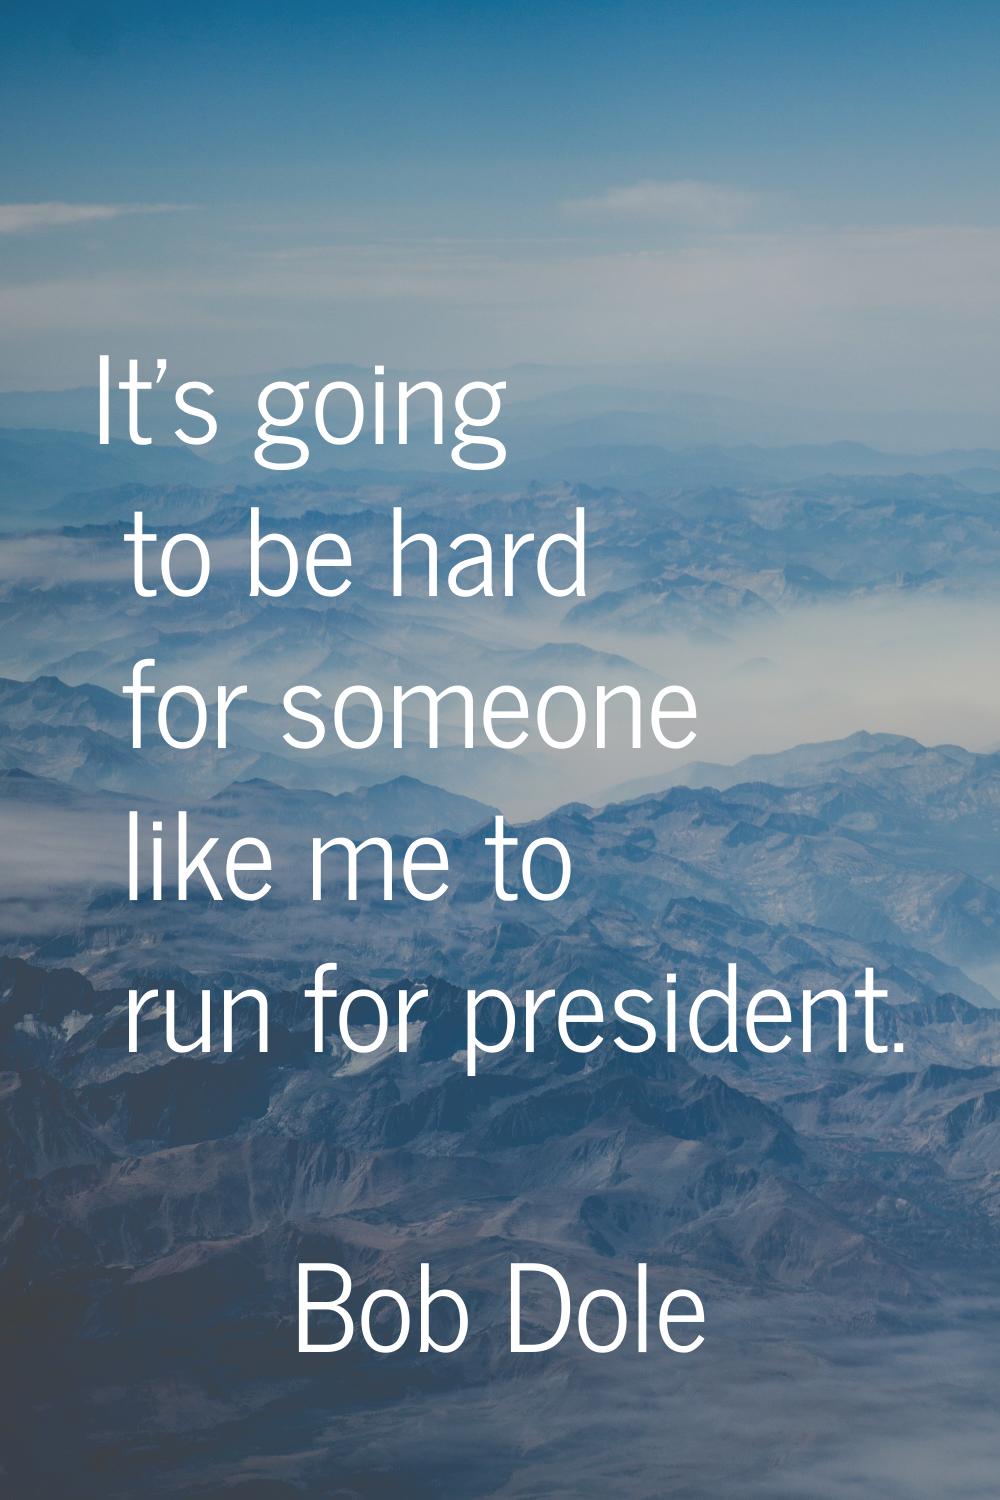 It's going to be hard for someone like me to run for president.